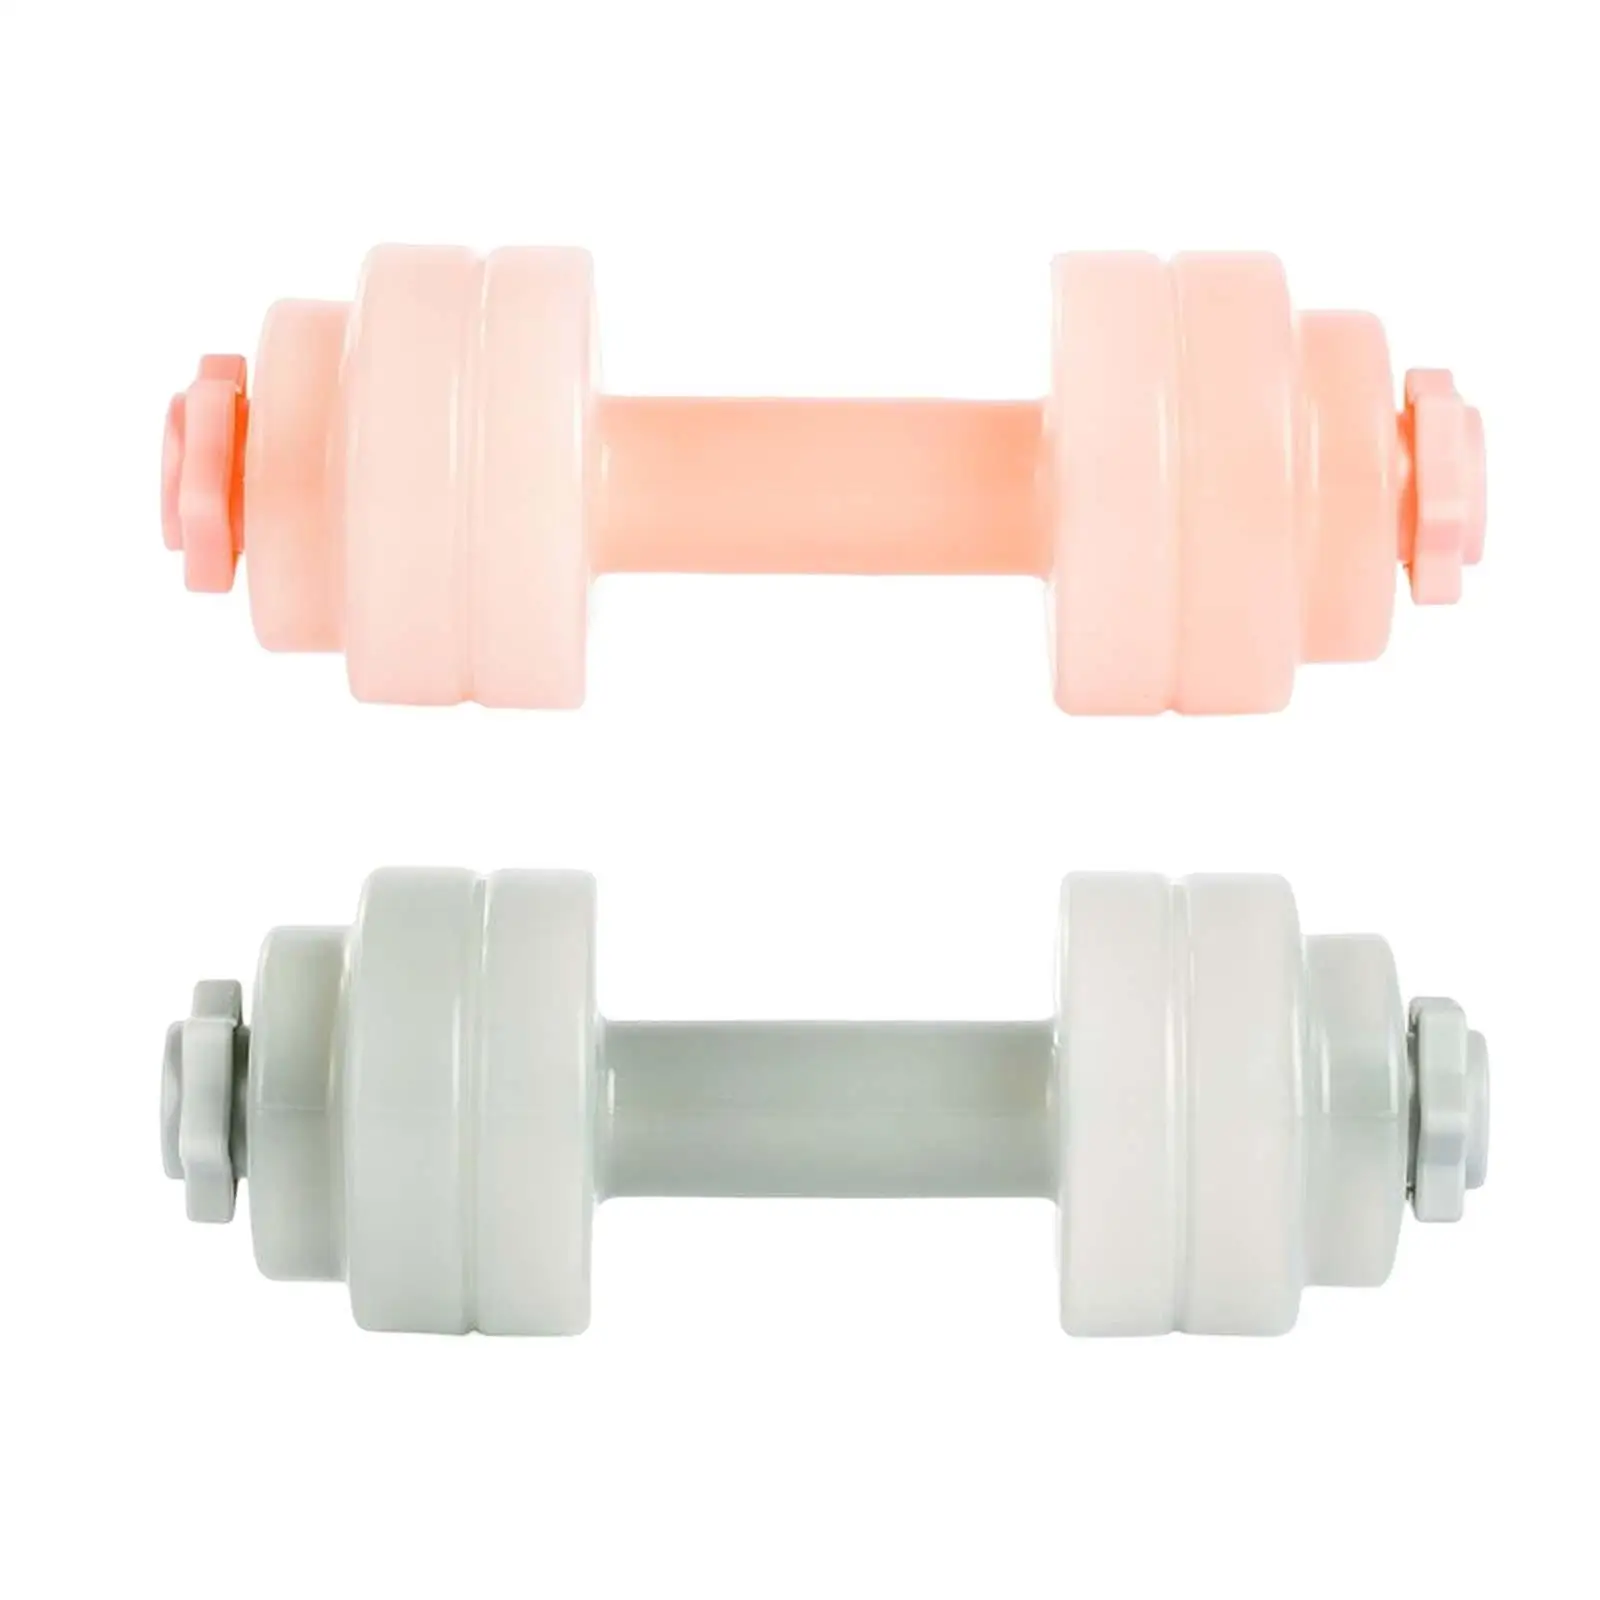 Water Filled Dumbbell Water Dumbbells Weights Fillable for Gym